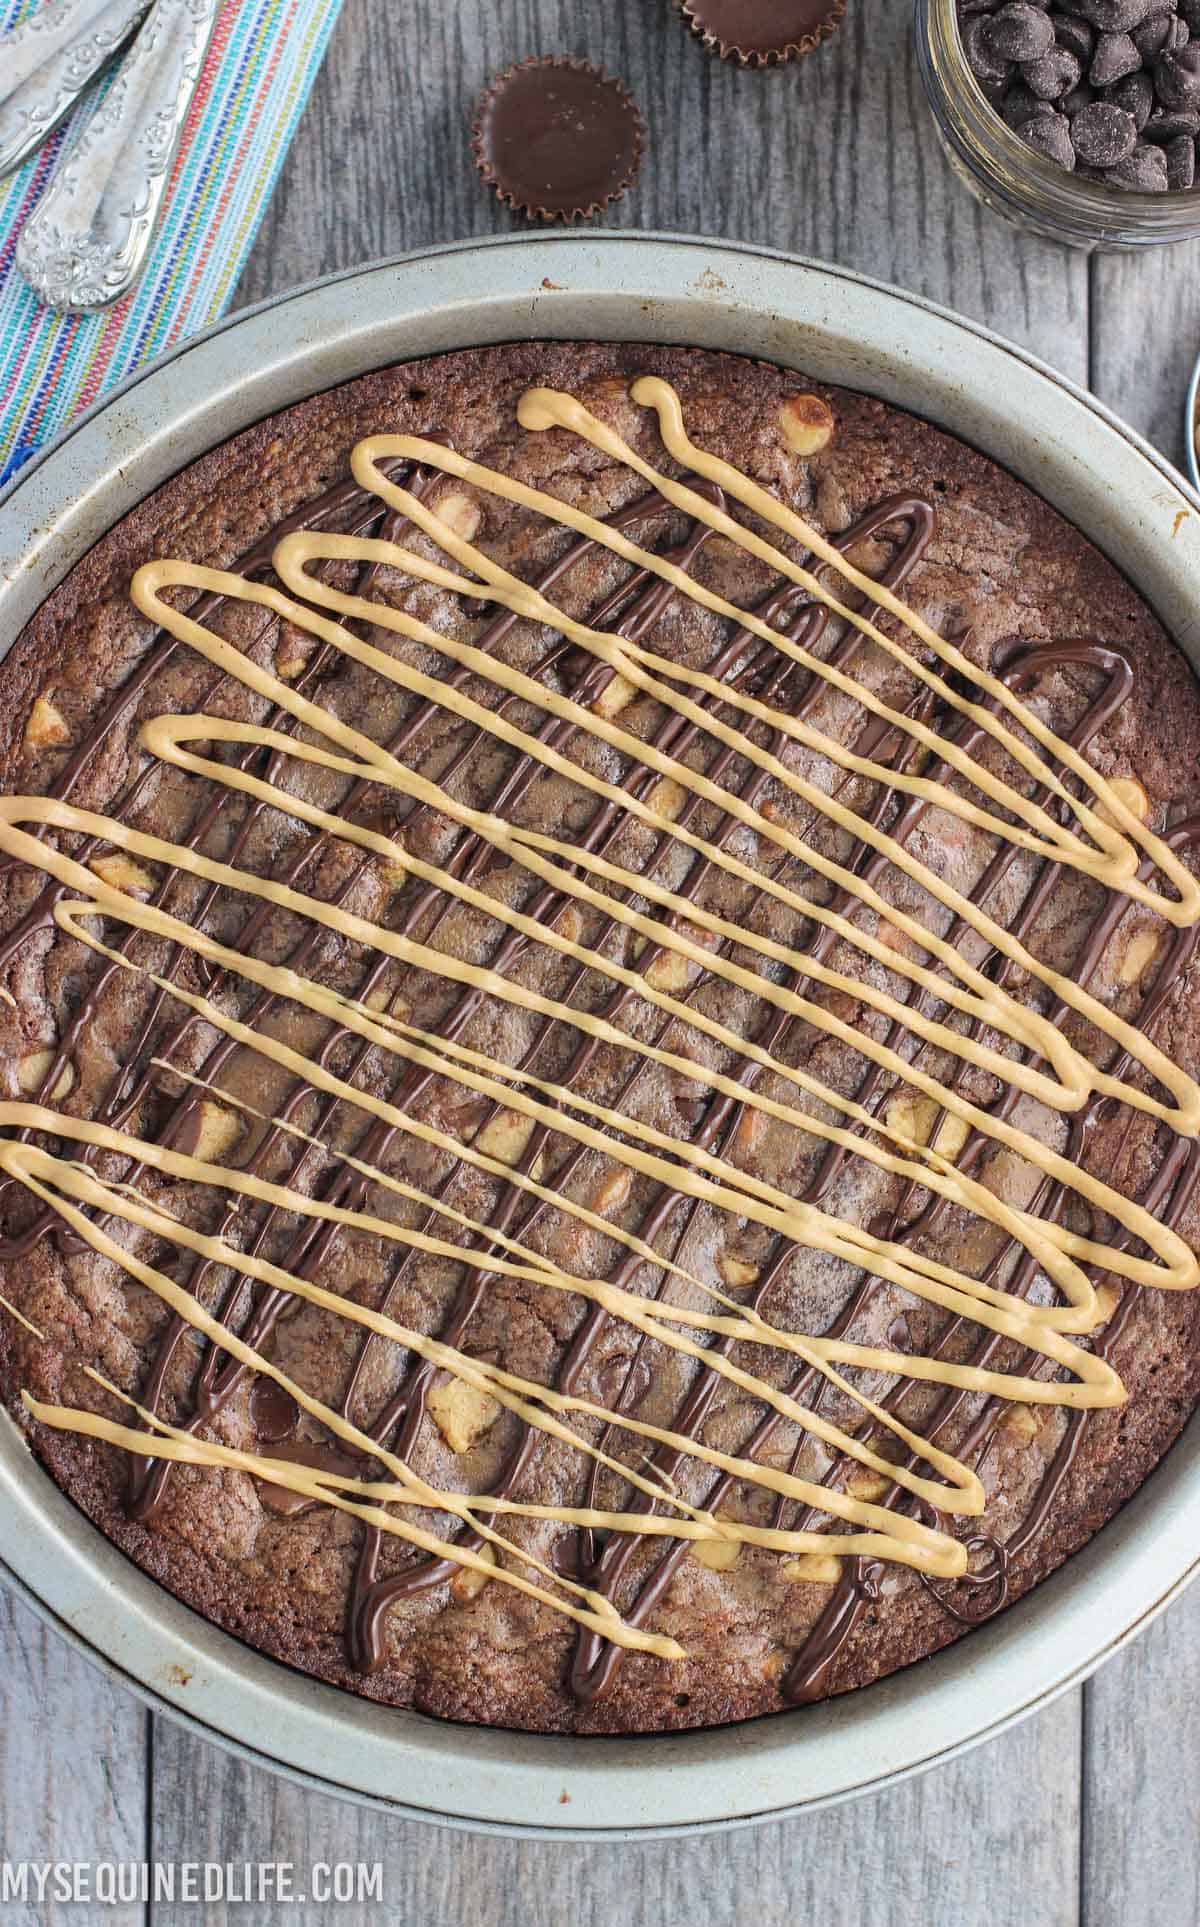 Melted chocolate and peanut butter chips drizzled over a brownie cake in its pan.